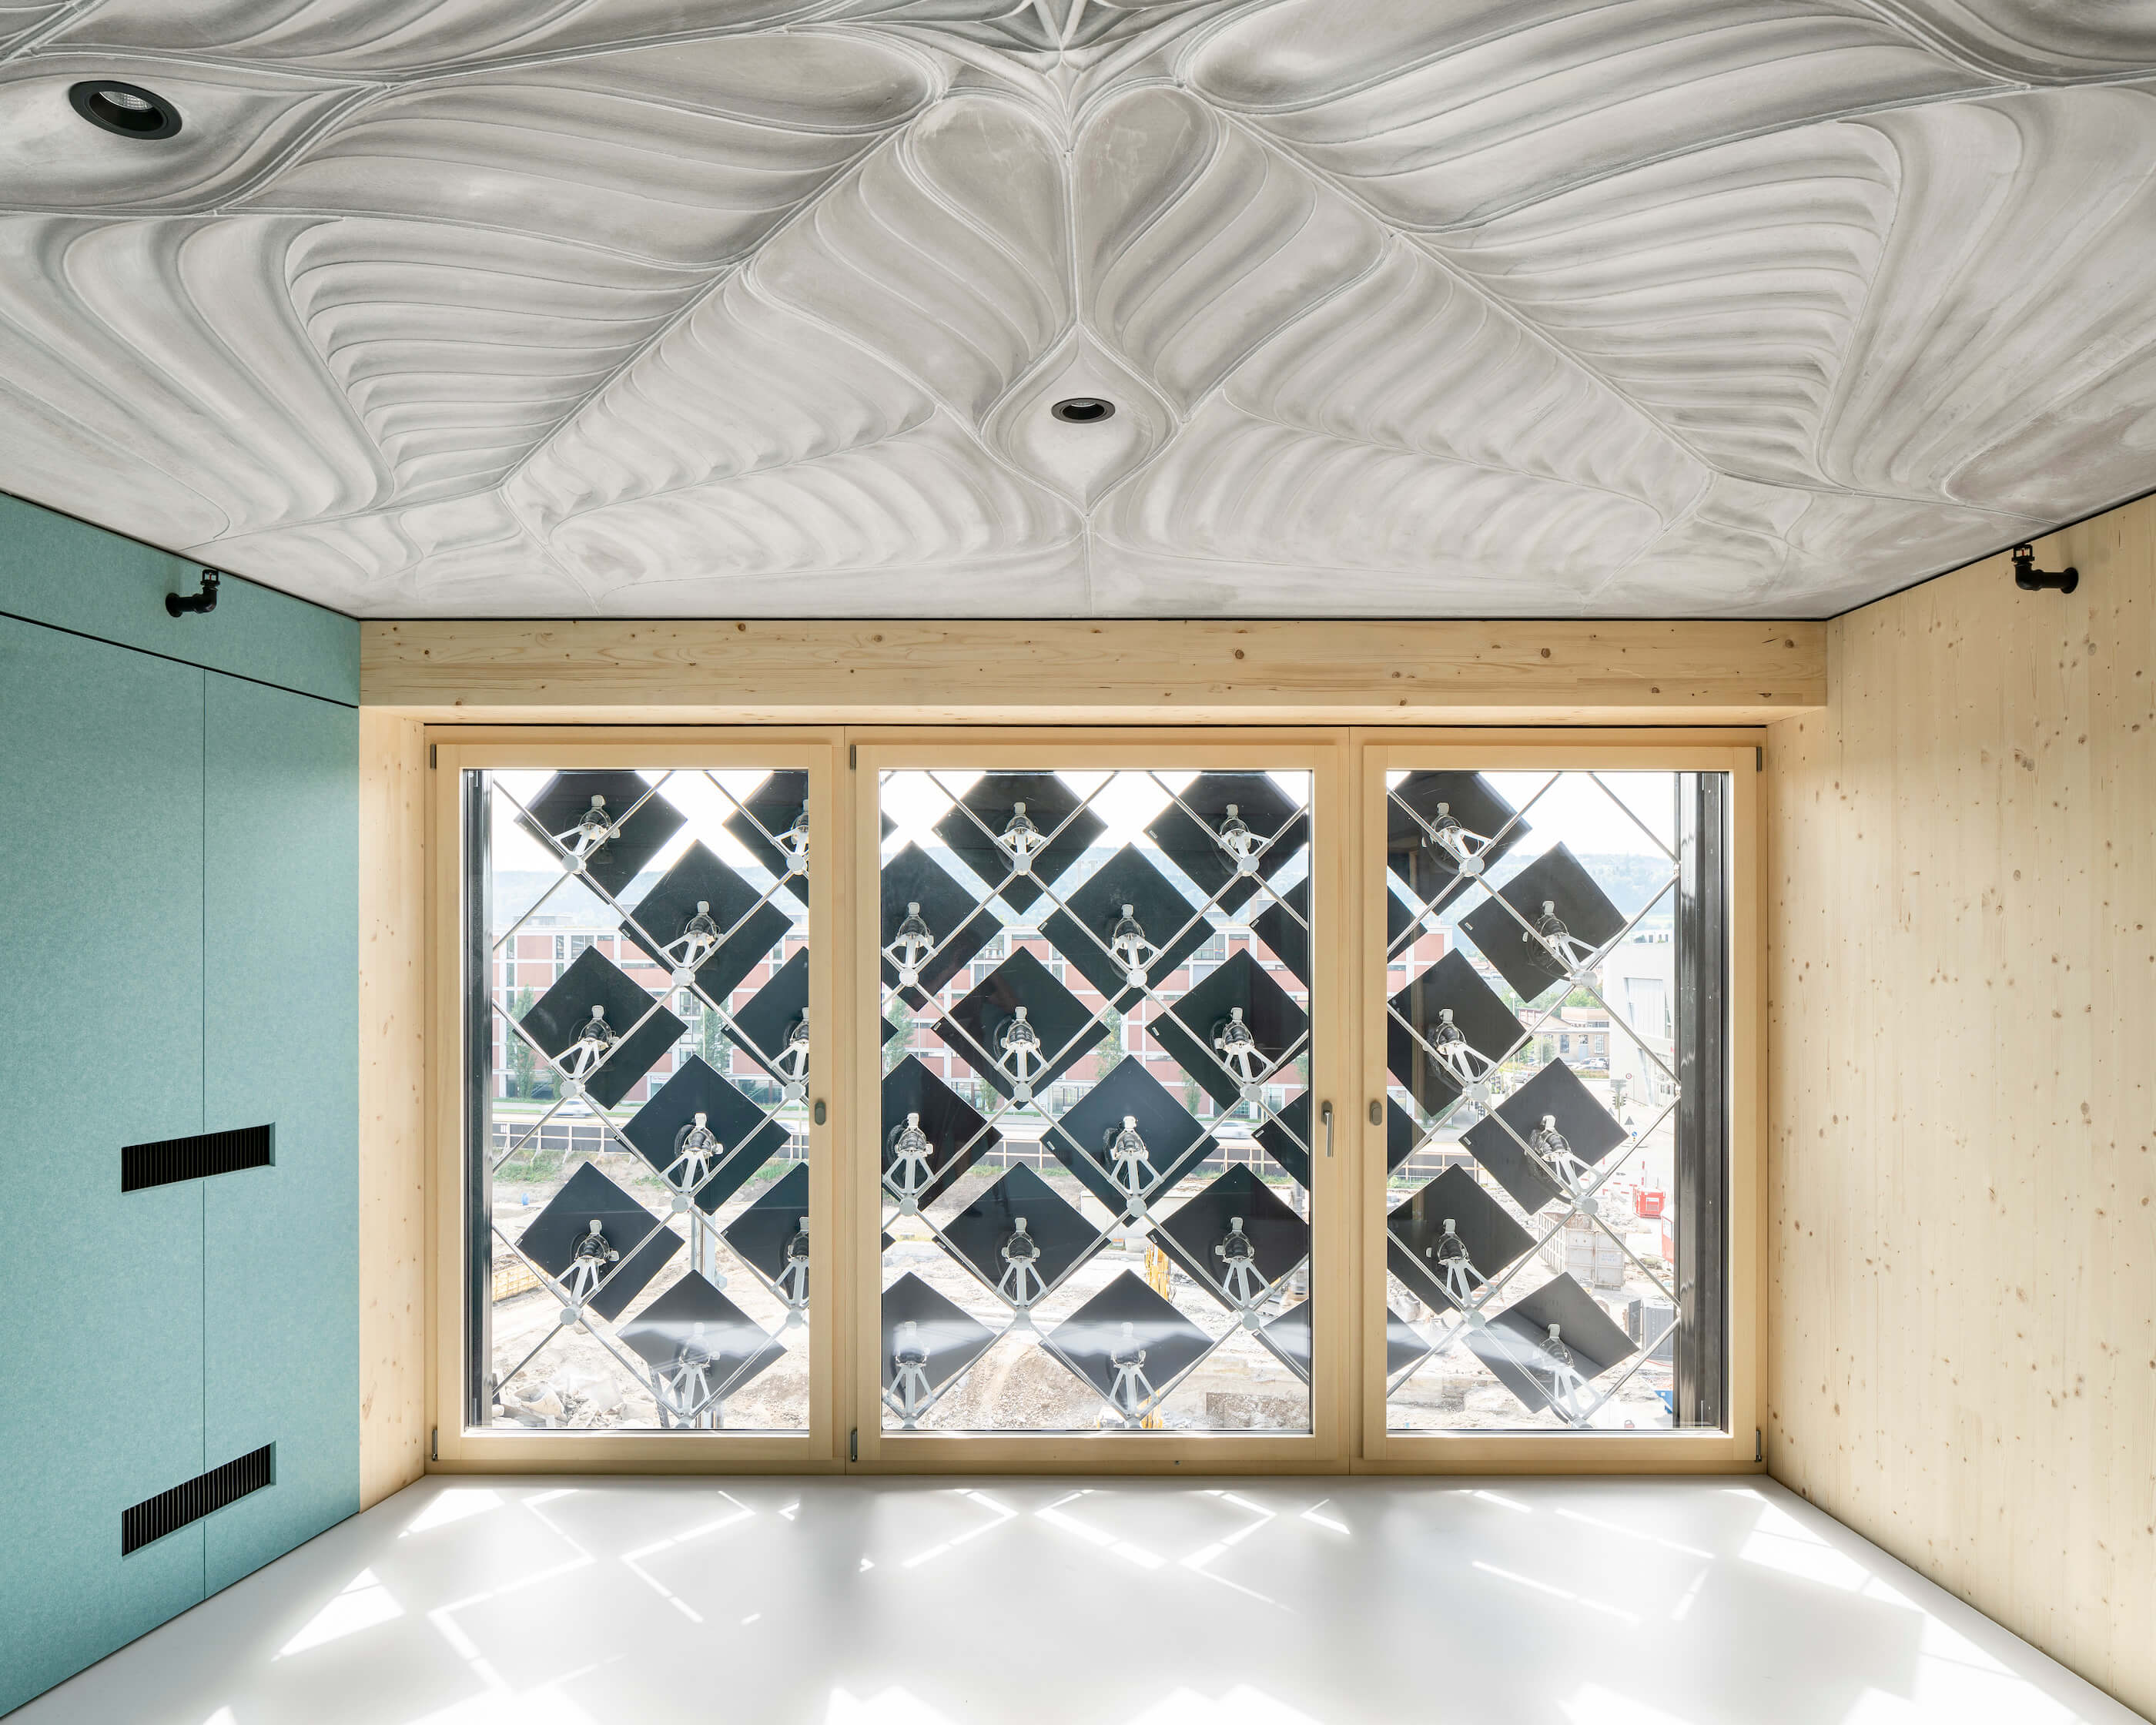 a room with an intricate concrete roof structure and pv panels affixed to a window